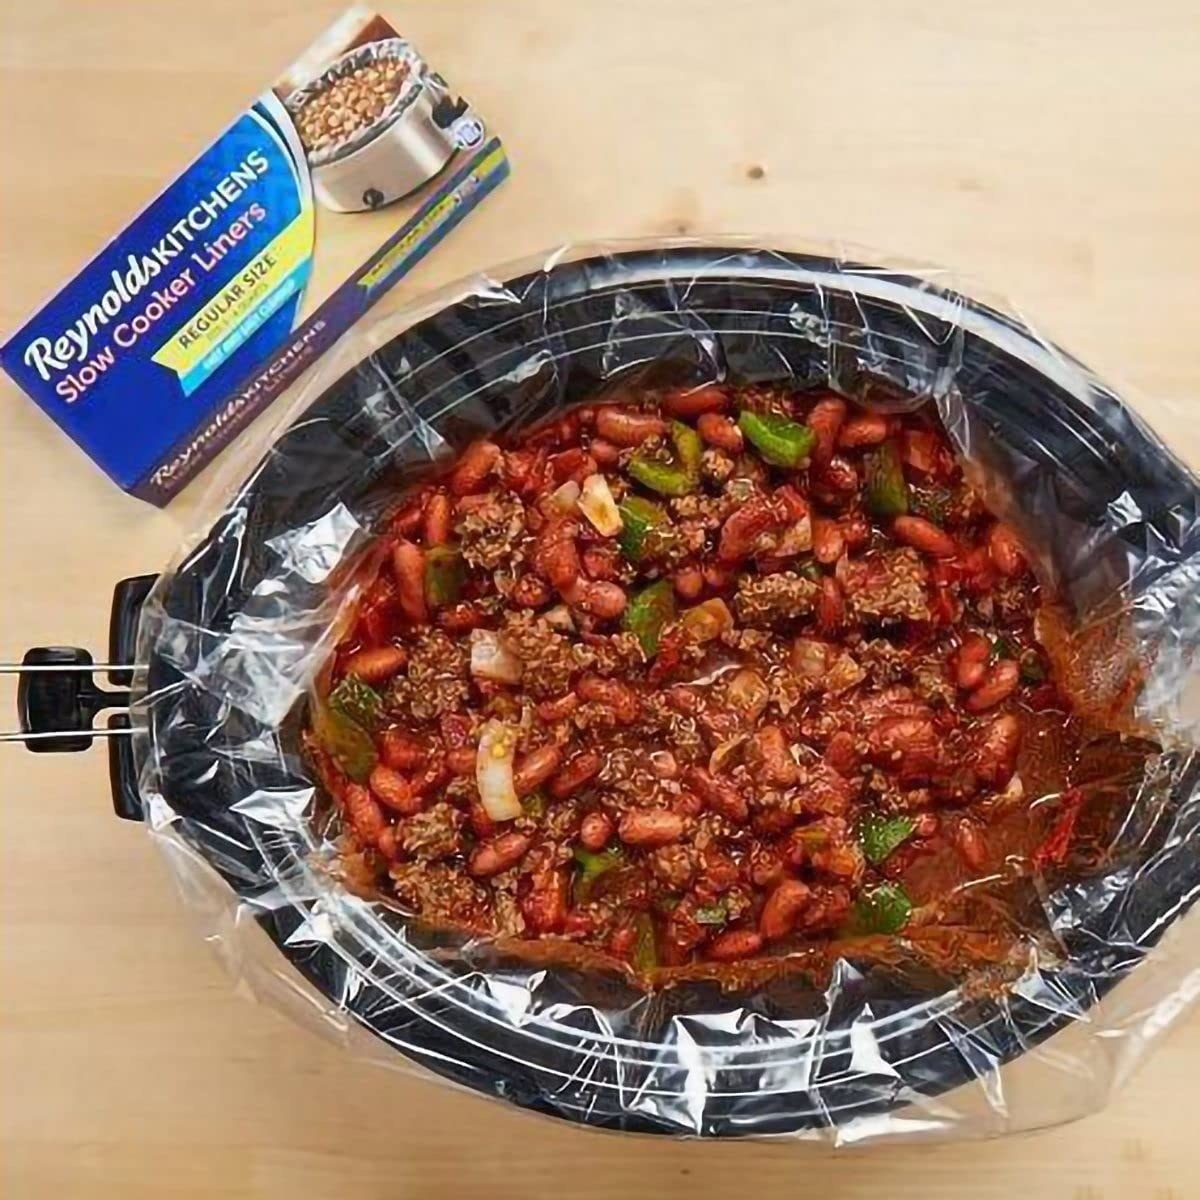 Reviewer image of chili cooked inside a liner in a crockpot